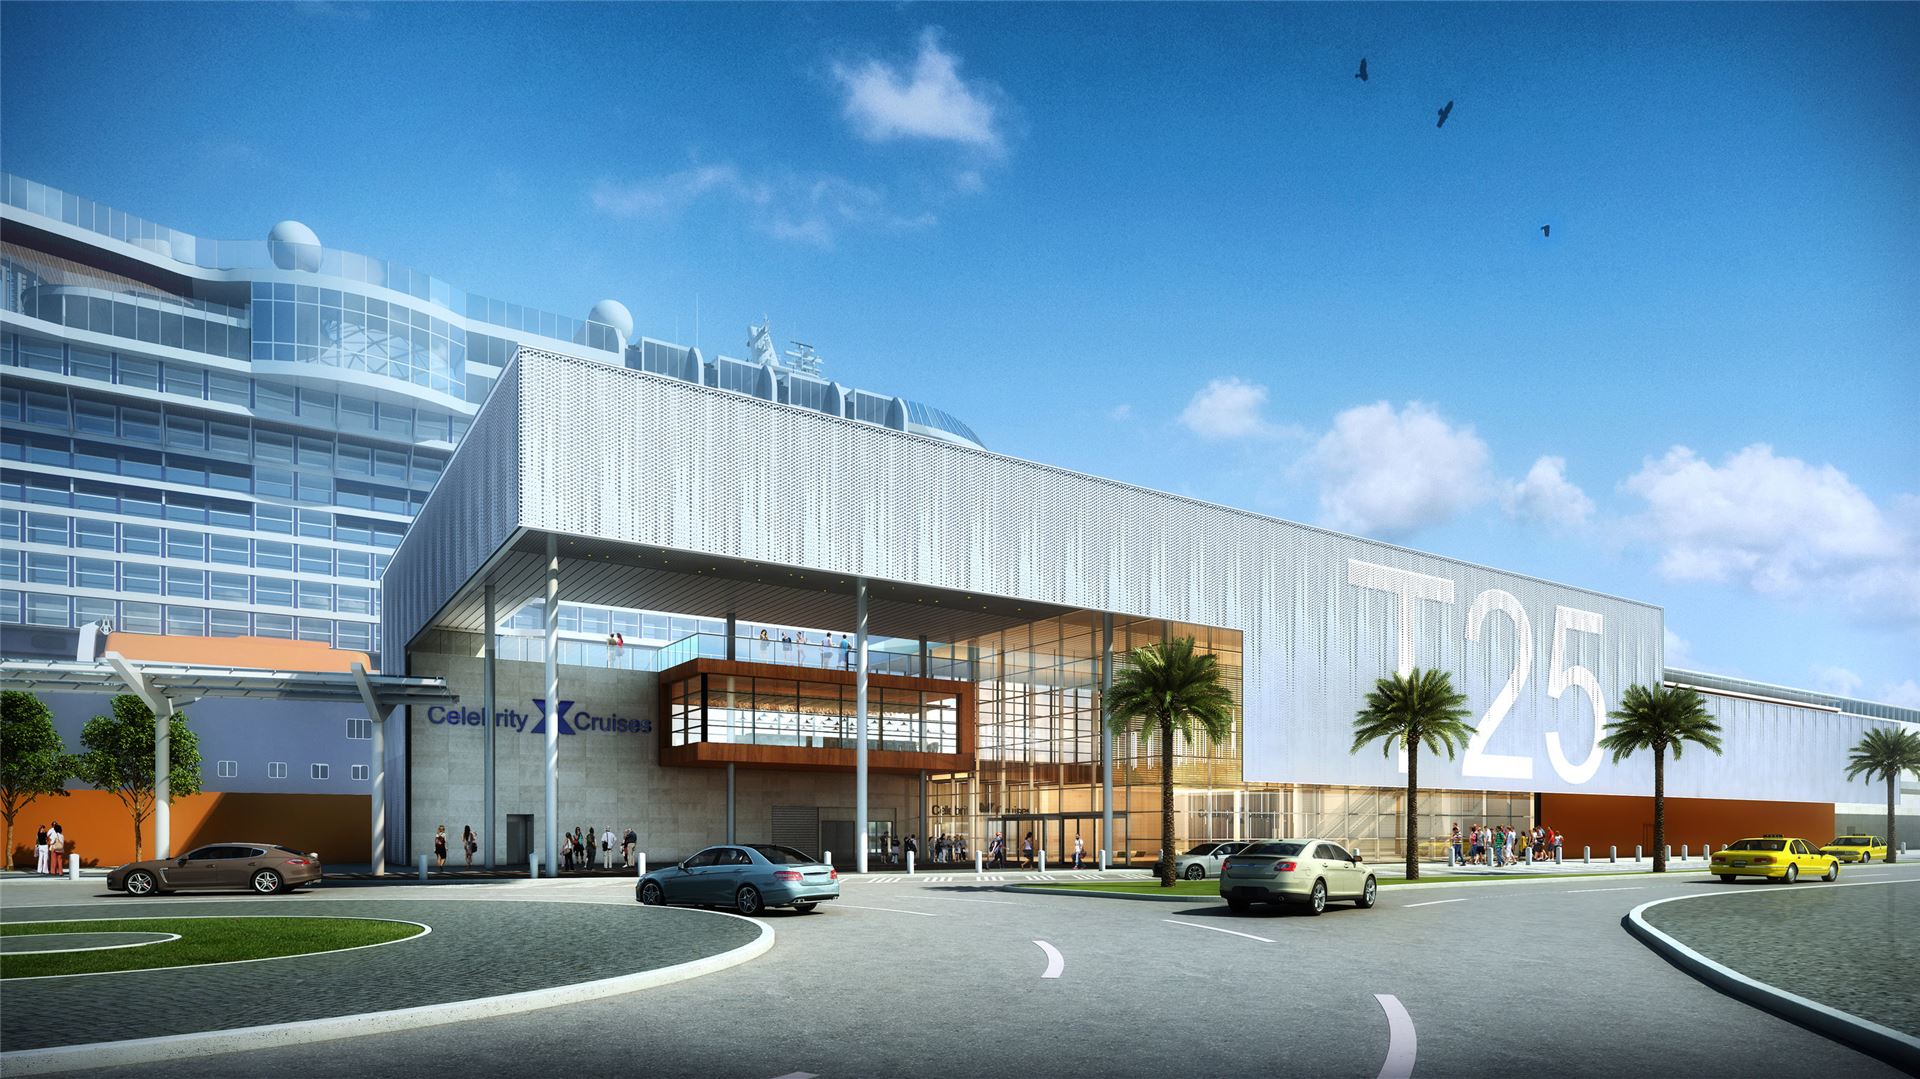 Celebrity Cruises to Build First Brand-Designed Cruise Terminal at Port Everglades